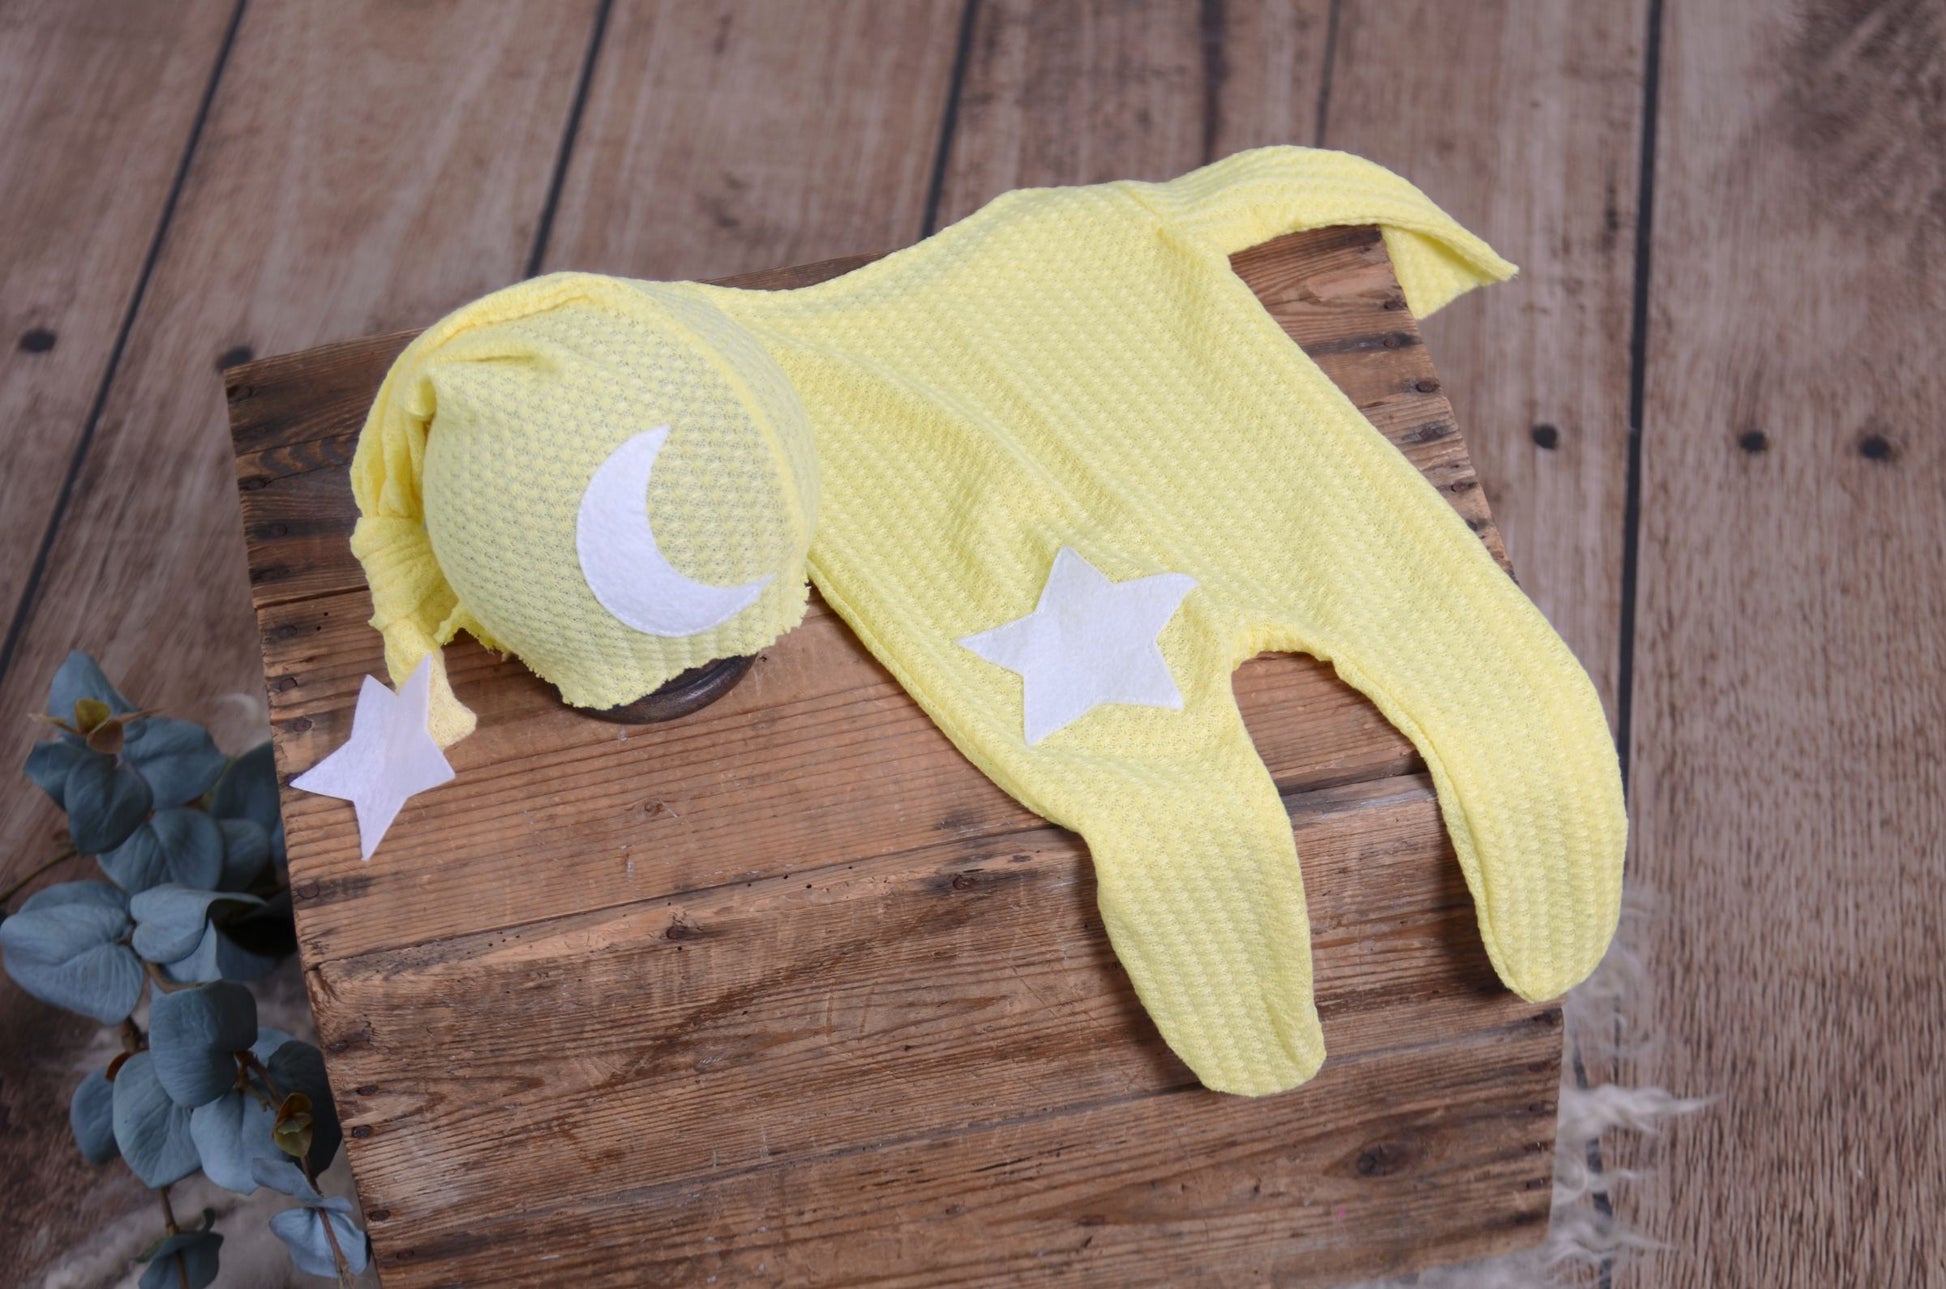 Yellow waffle fabric footed pajamas and matching hat with moon and stars, displayed as a newborn photography prop on a rustic wooden surface.